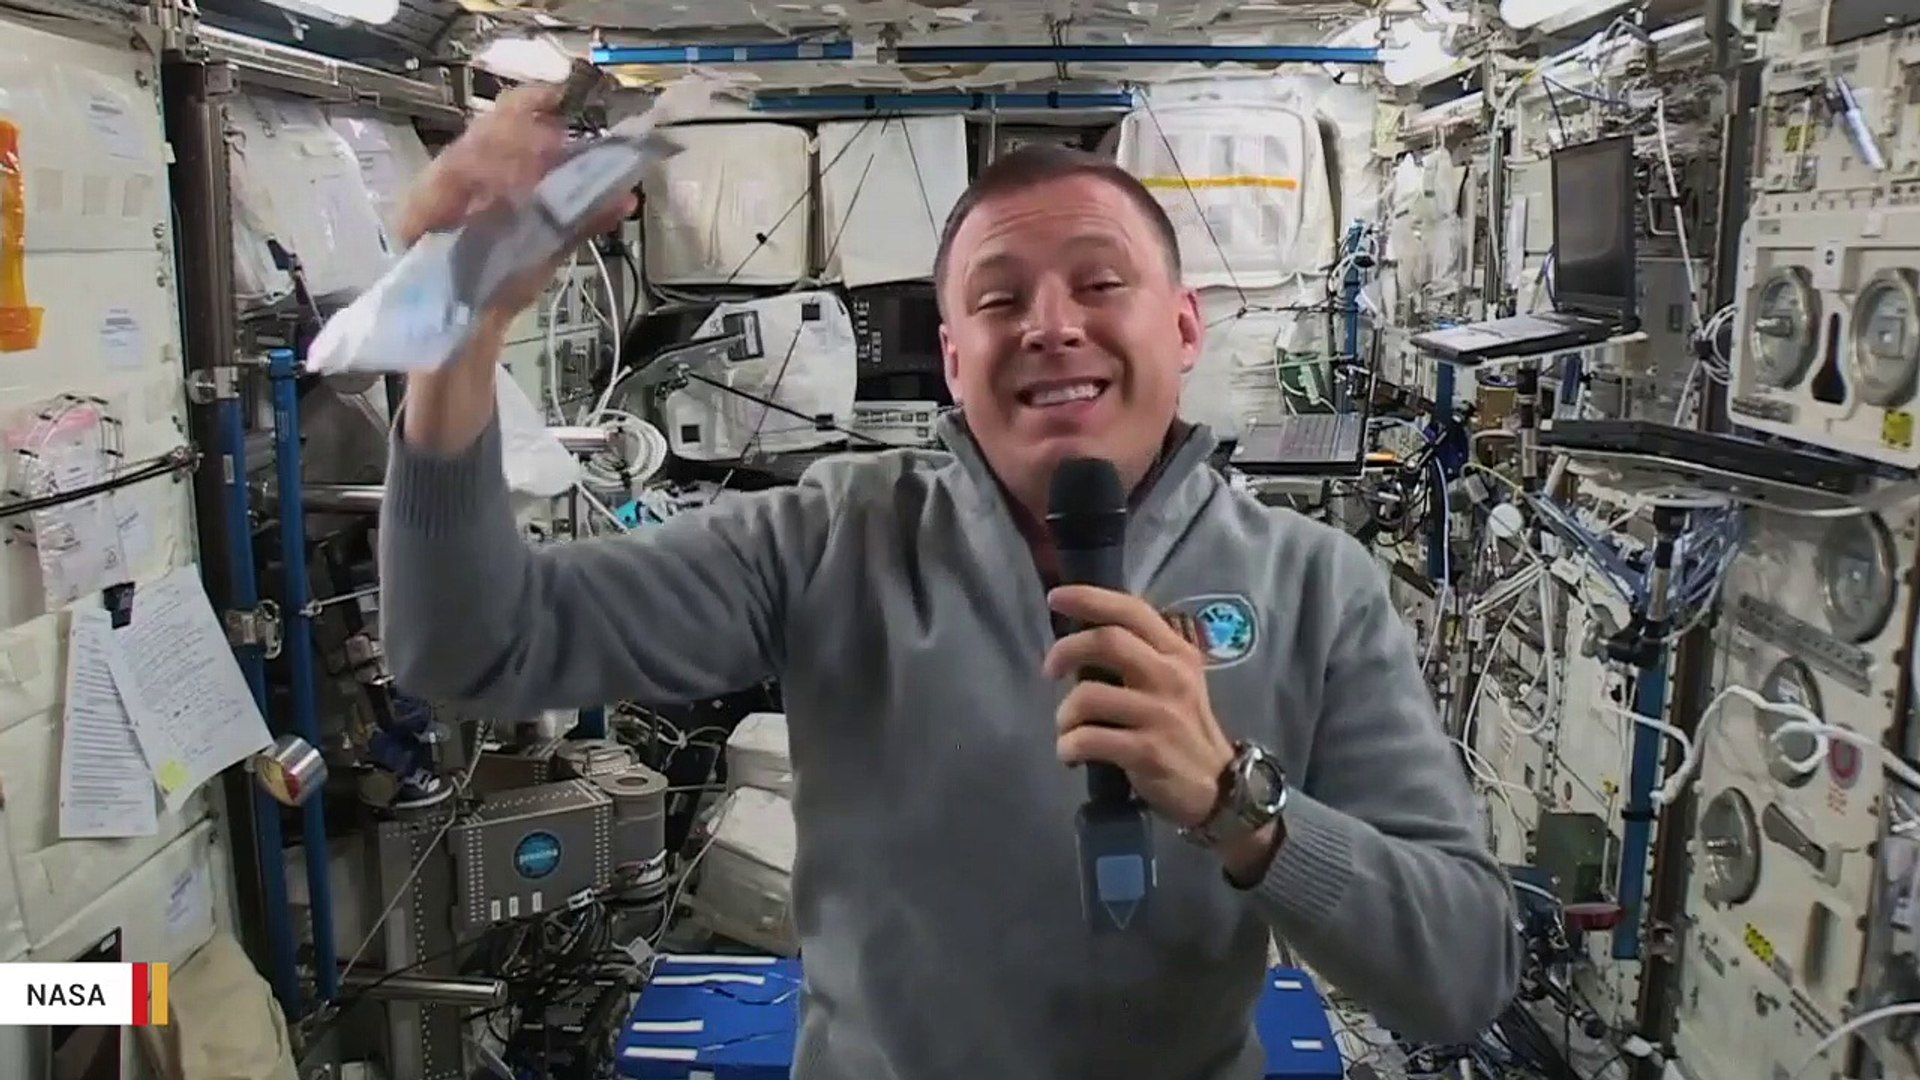 How Astronauts Consume Coffee In Space Nothing Like How We Drink On Earth